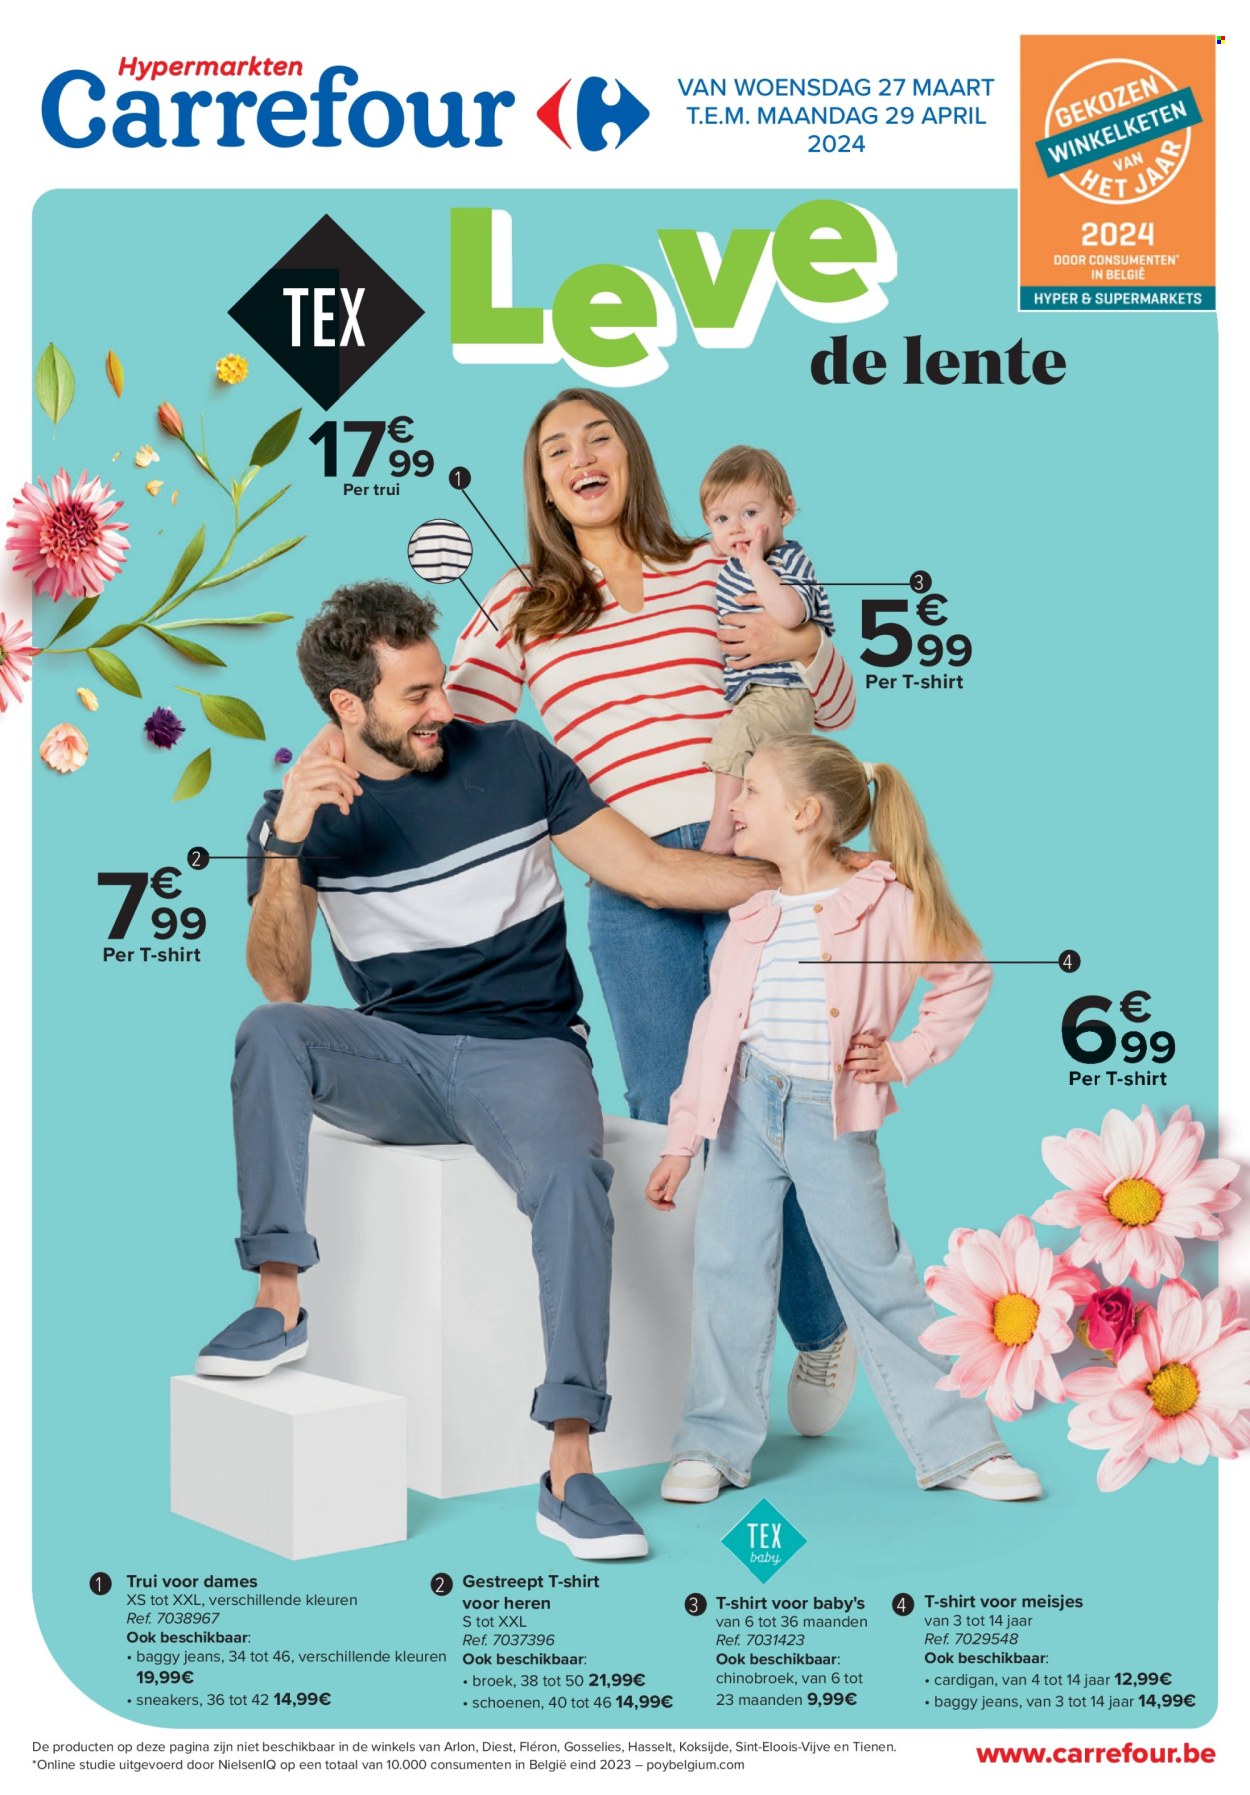 Catalogue Carrefour hypermarkt - 27.3.2024 - 29.4.2024. Page 1.